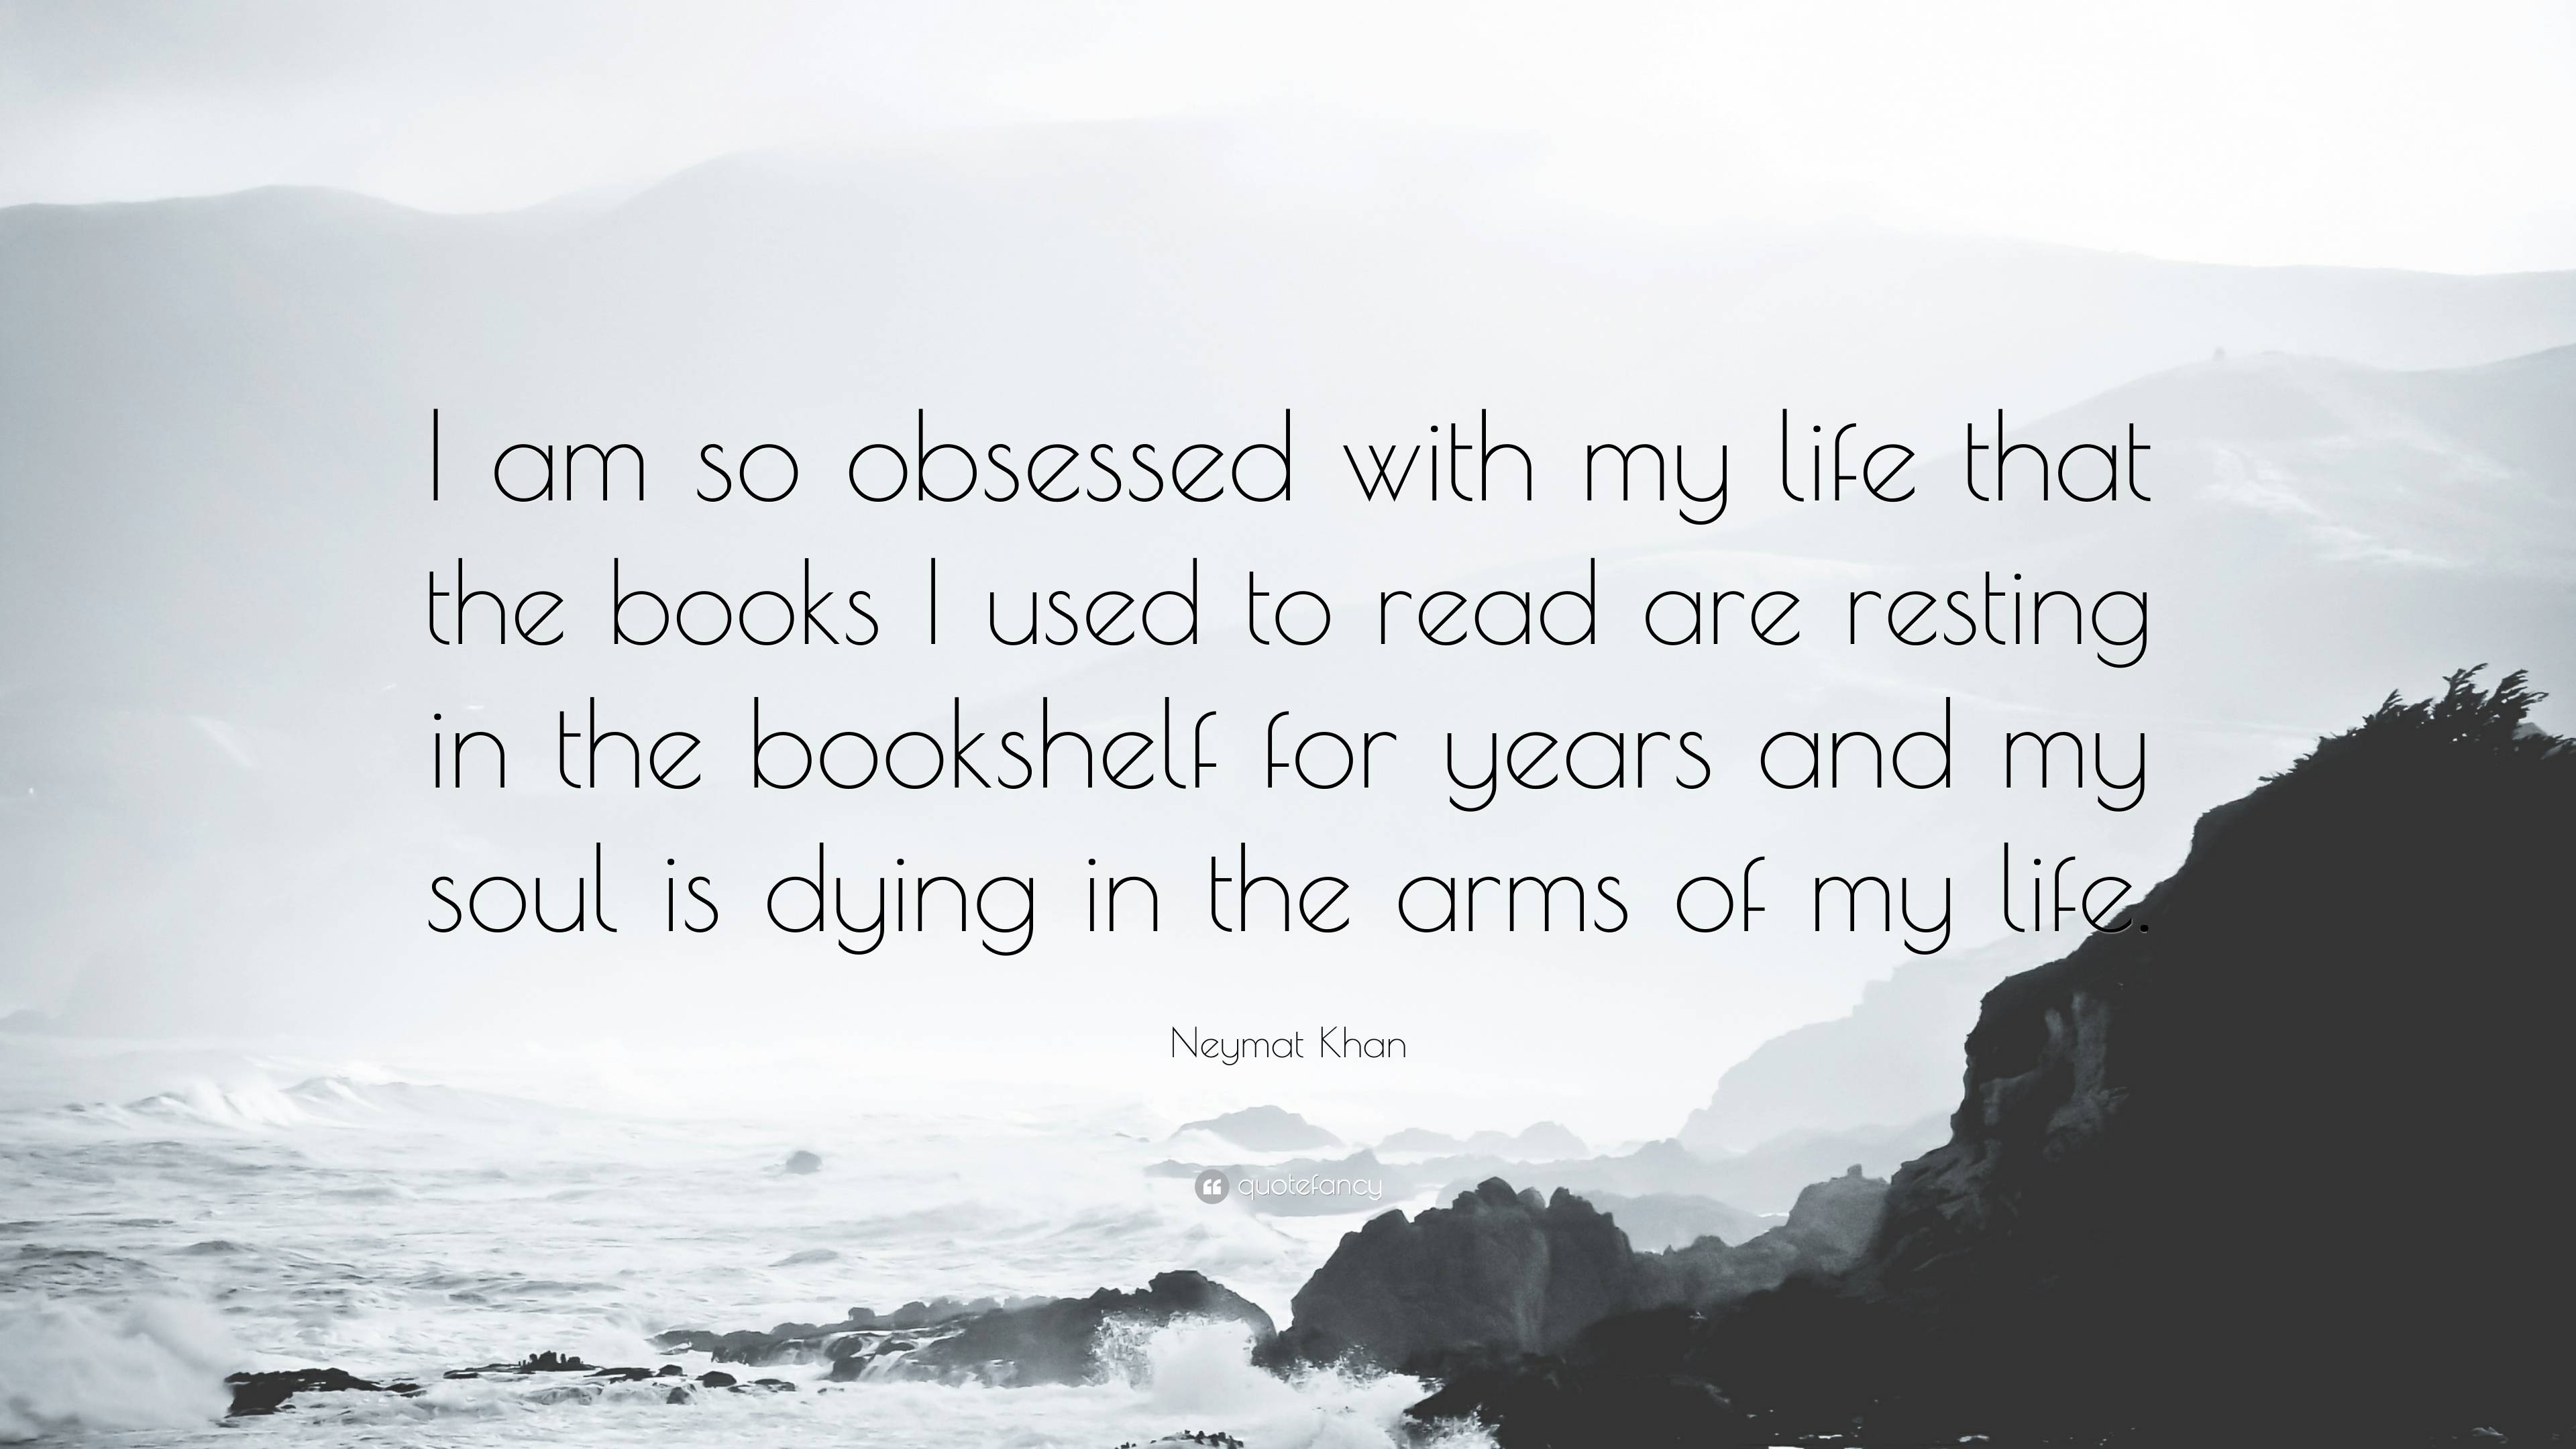 https://quotefancy.com/media/wallpaper/3840x2160/7103492-Neymat-Khan-Quote-I-am-so-obsessed-with-my-life-that-the-books-I.jpg